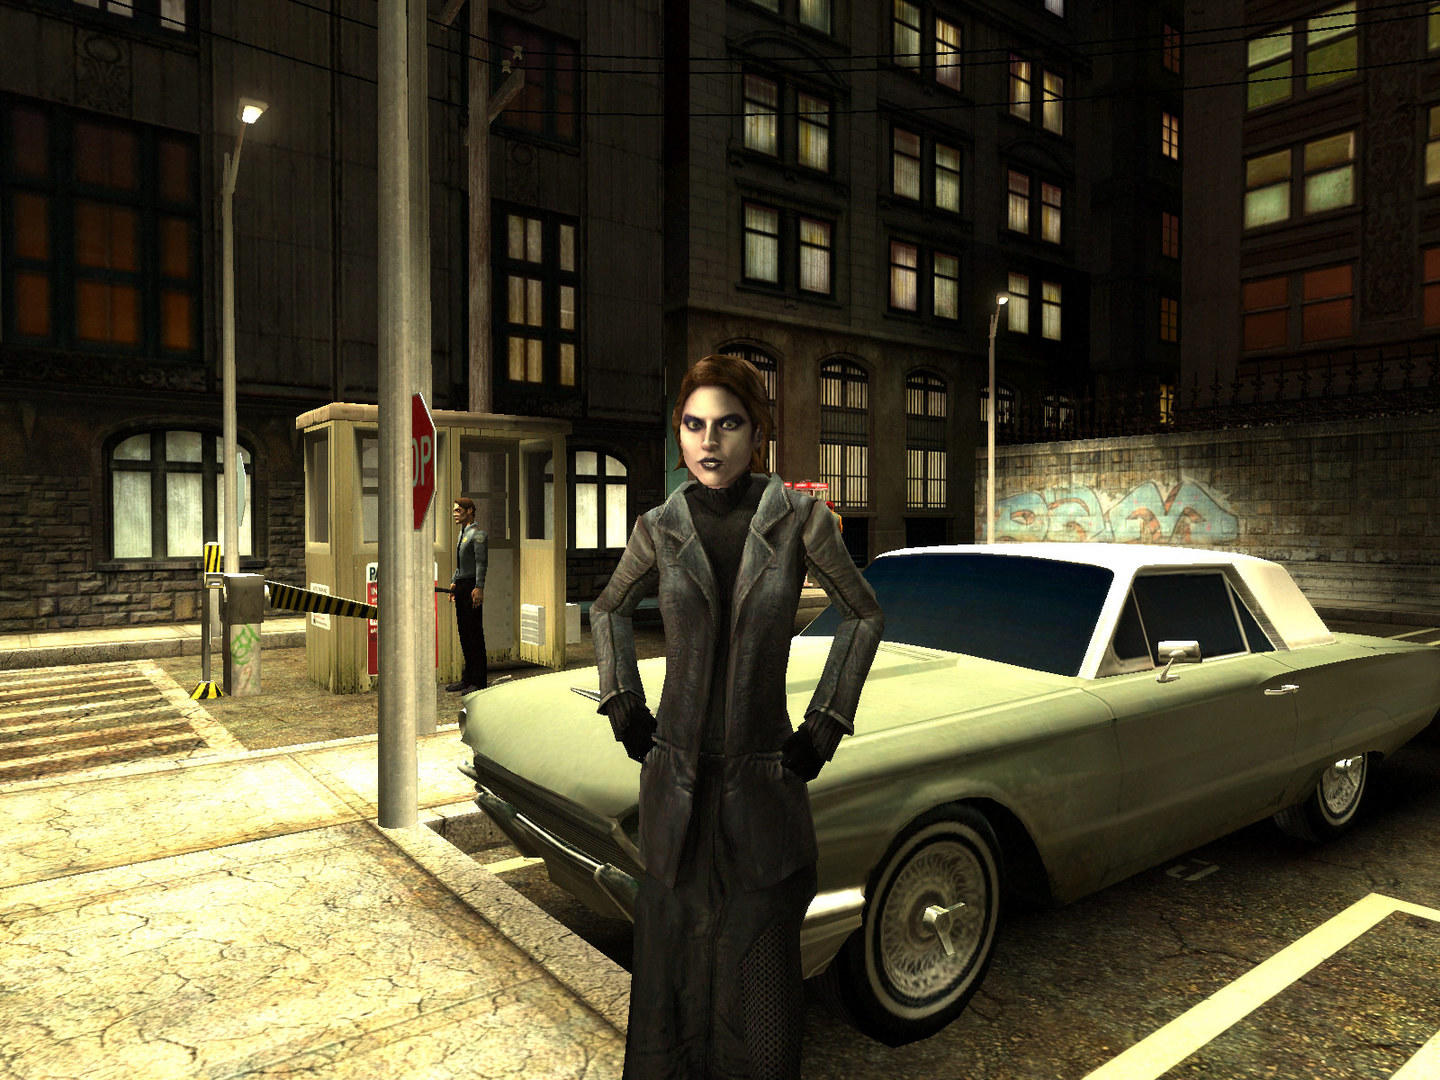 Vampire: The Masquerade - Bloodlines android iOS-TapTap